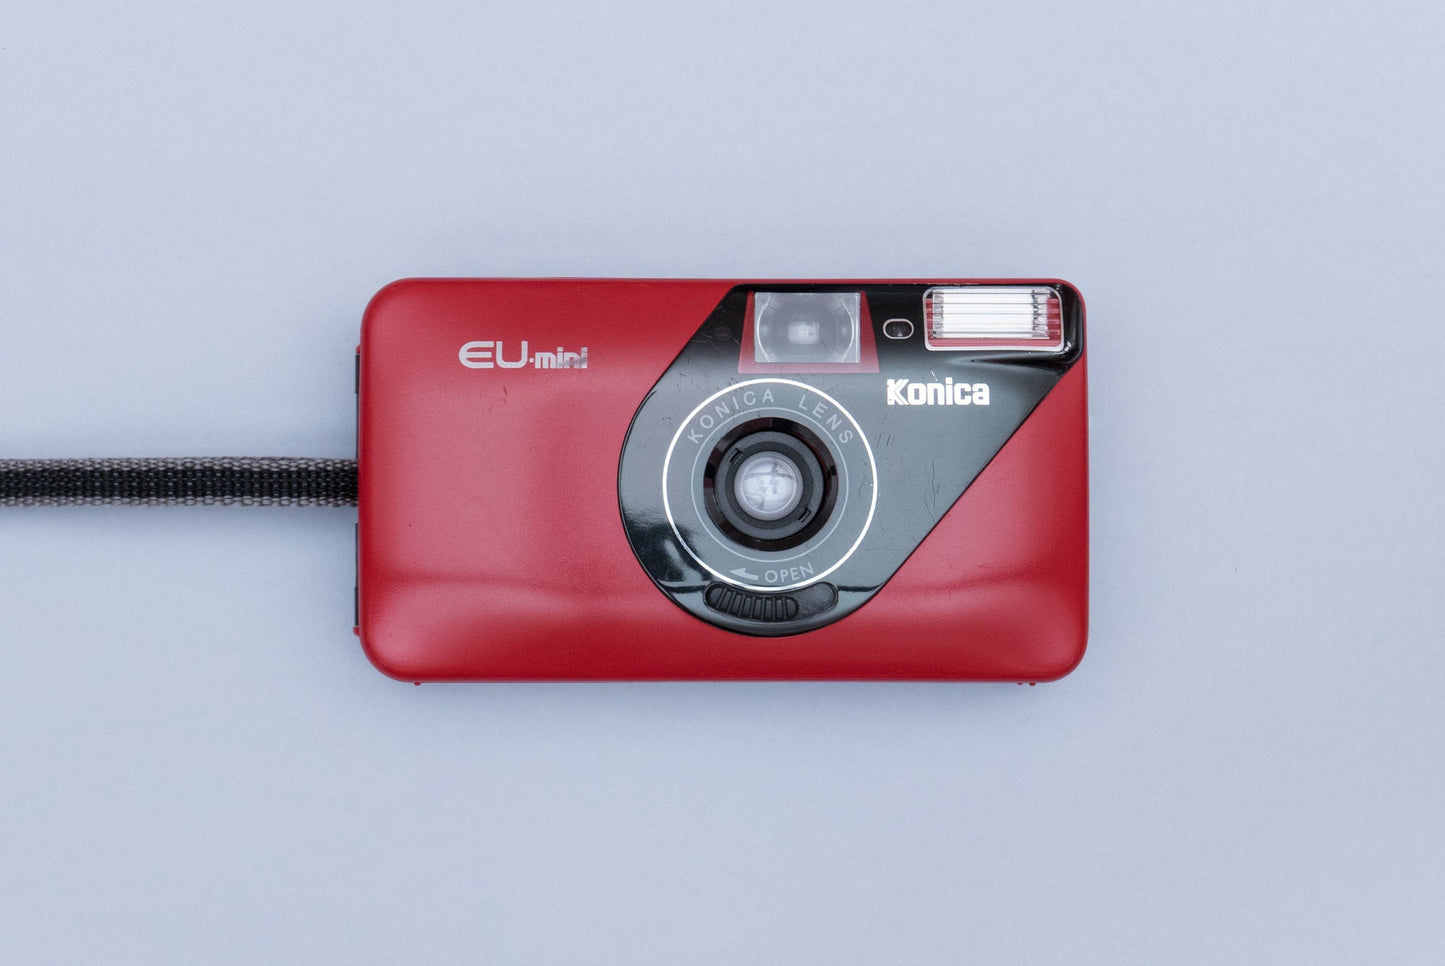 Konica EU-mini Compact 35mm Point and Shoot Film Camera Red